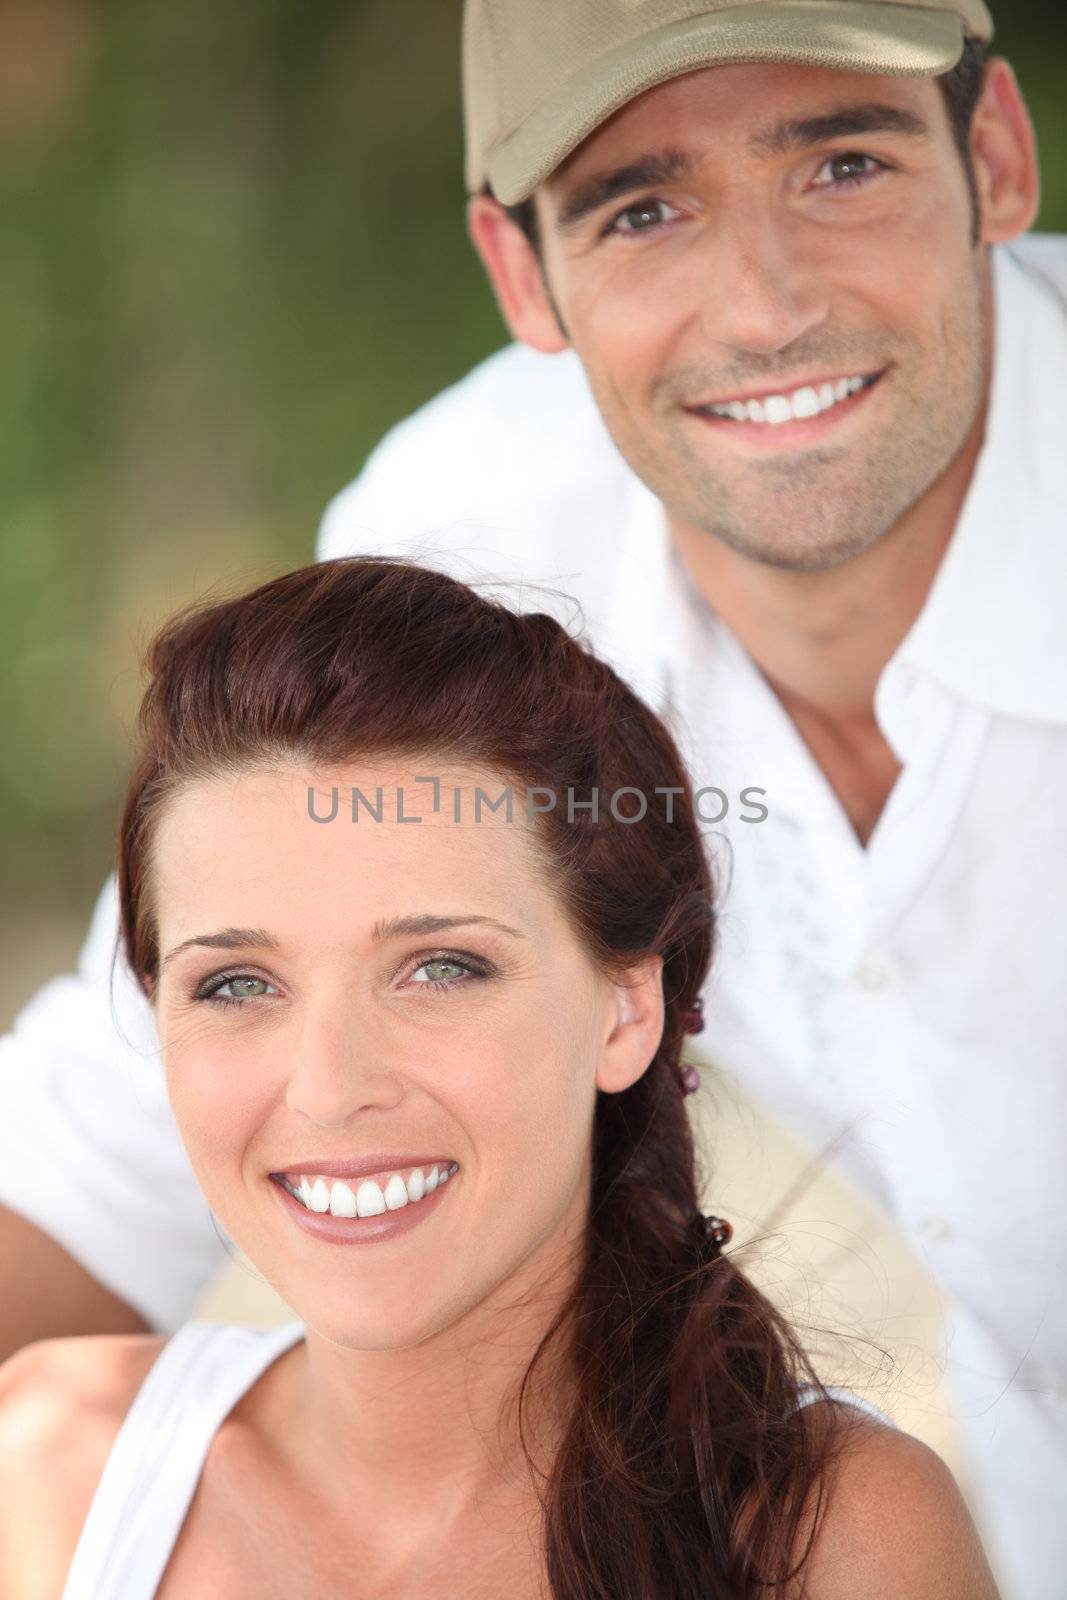 Smiling couple outdoors